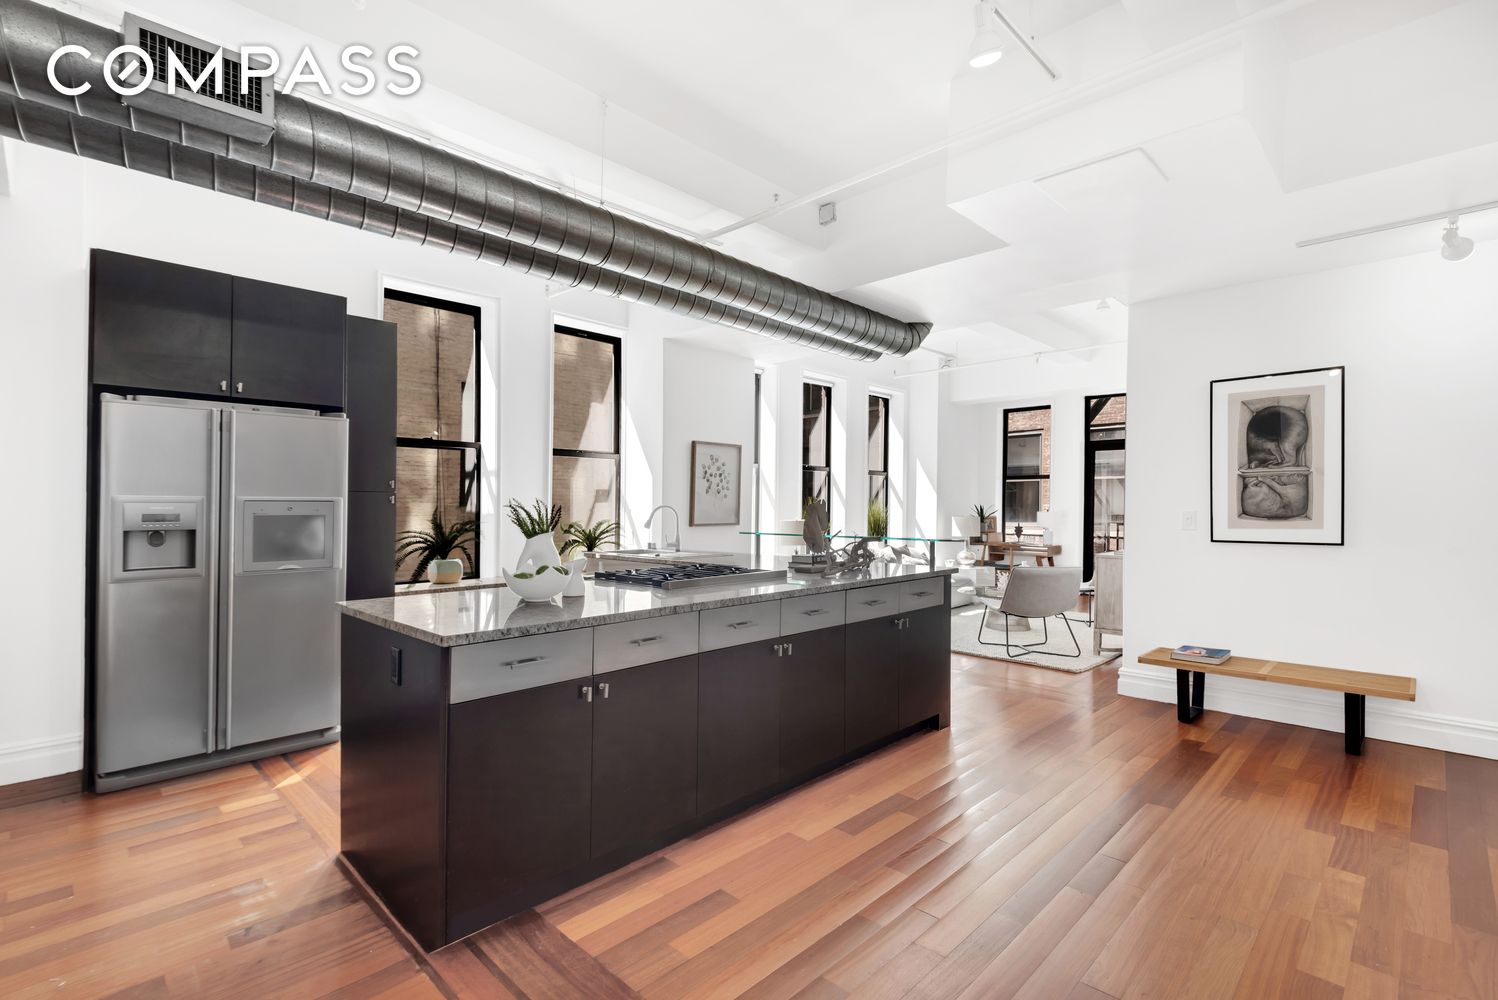 East 30th Street 4C, Nomad, Downtown, NYC - 2 Bedrooms  
2 Bathrooms  
4 Rooms - 